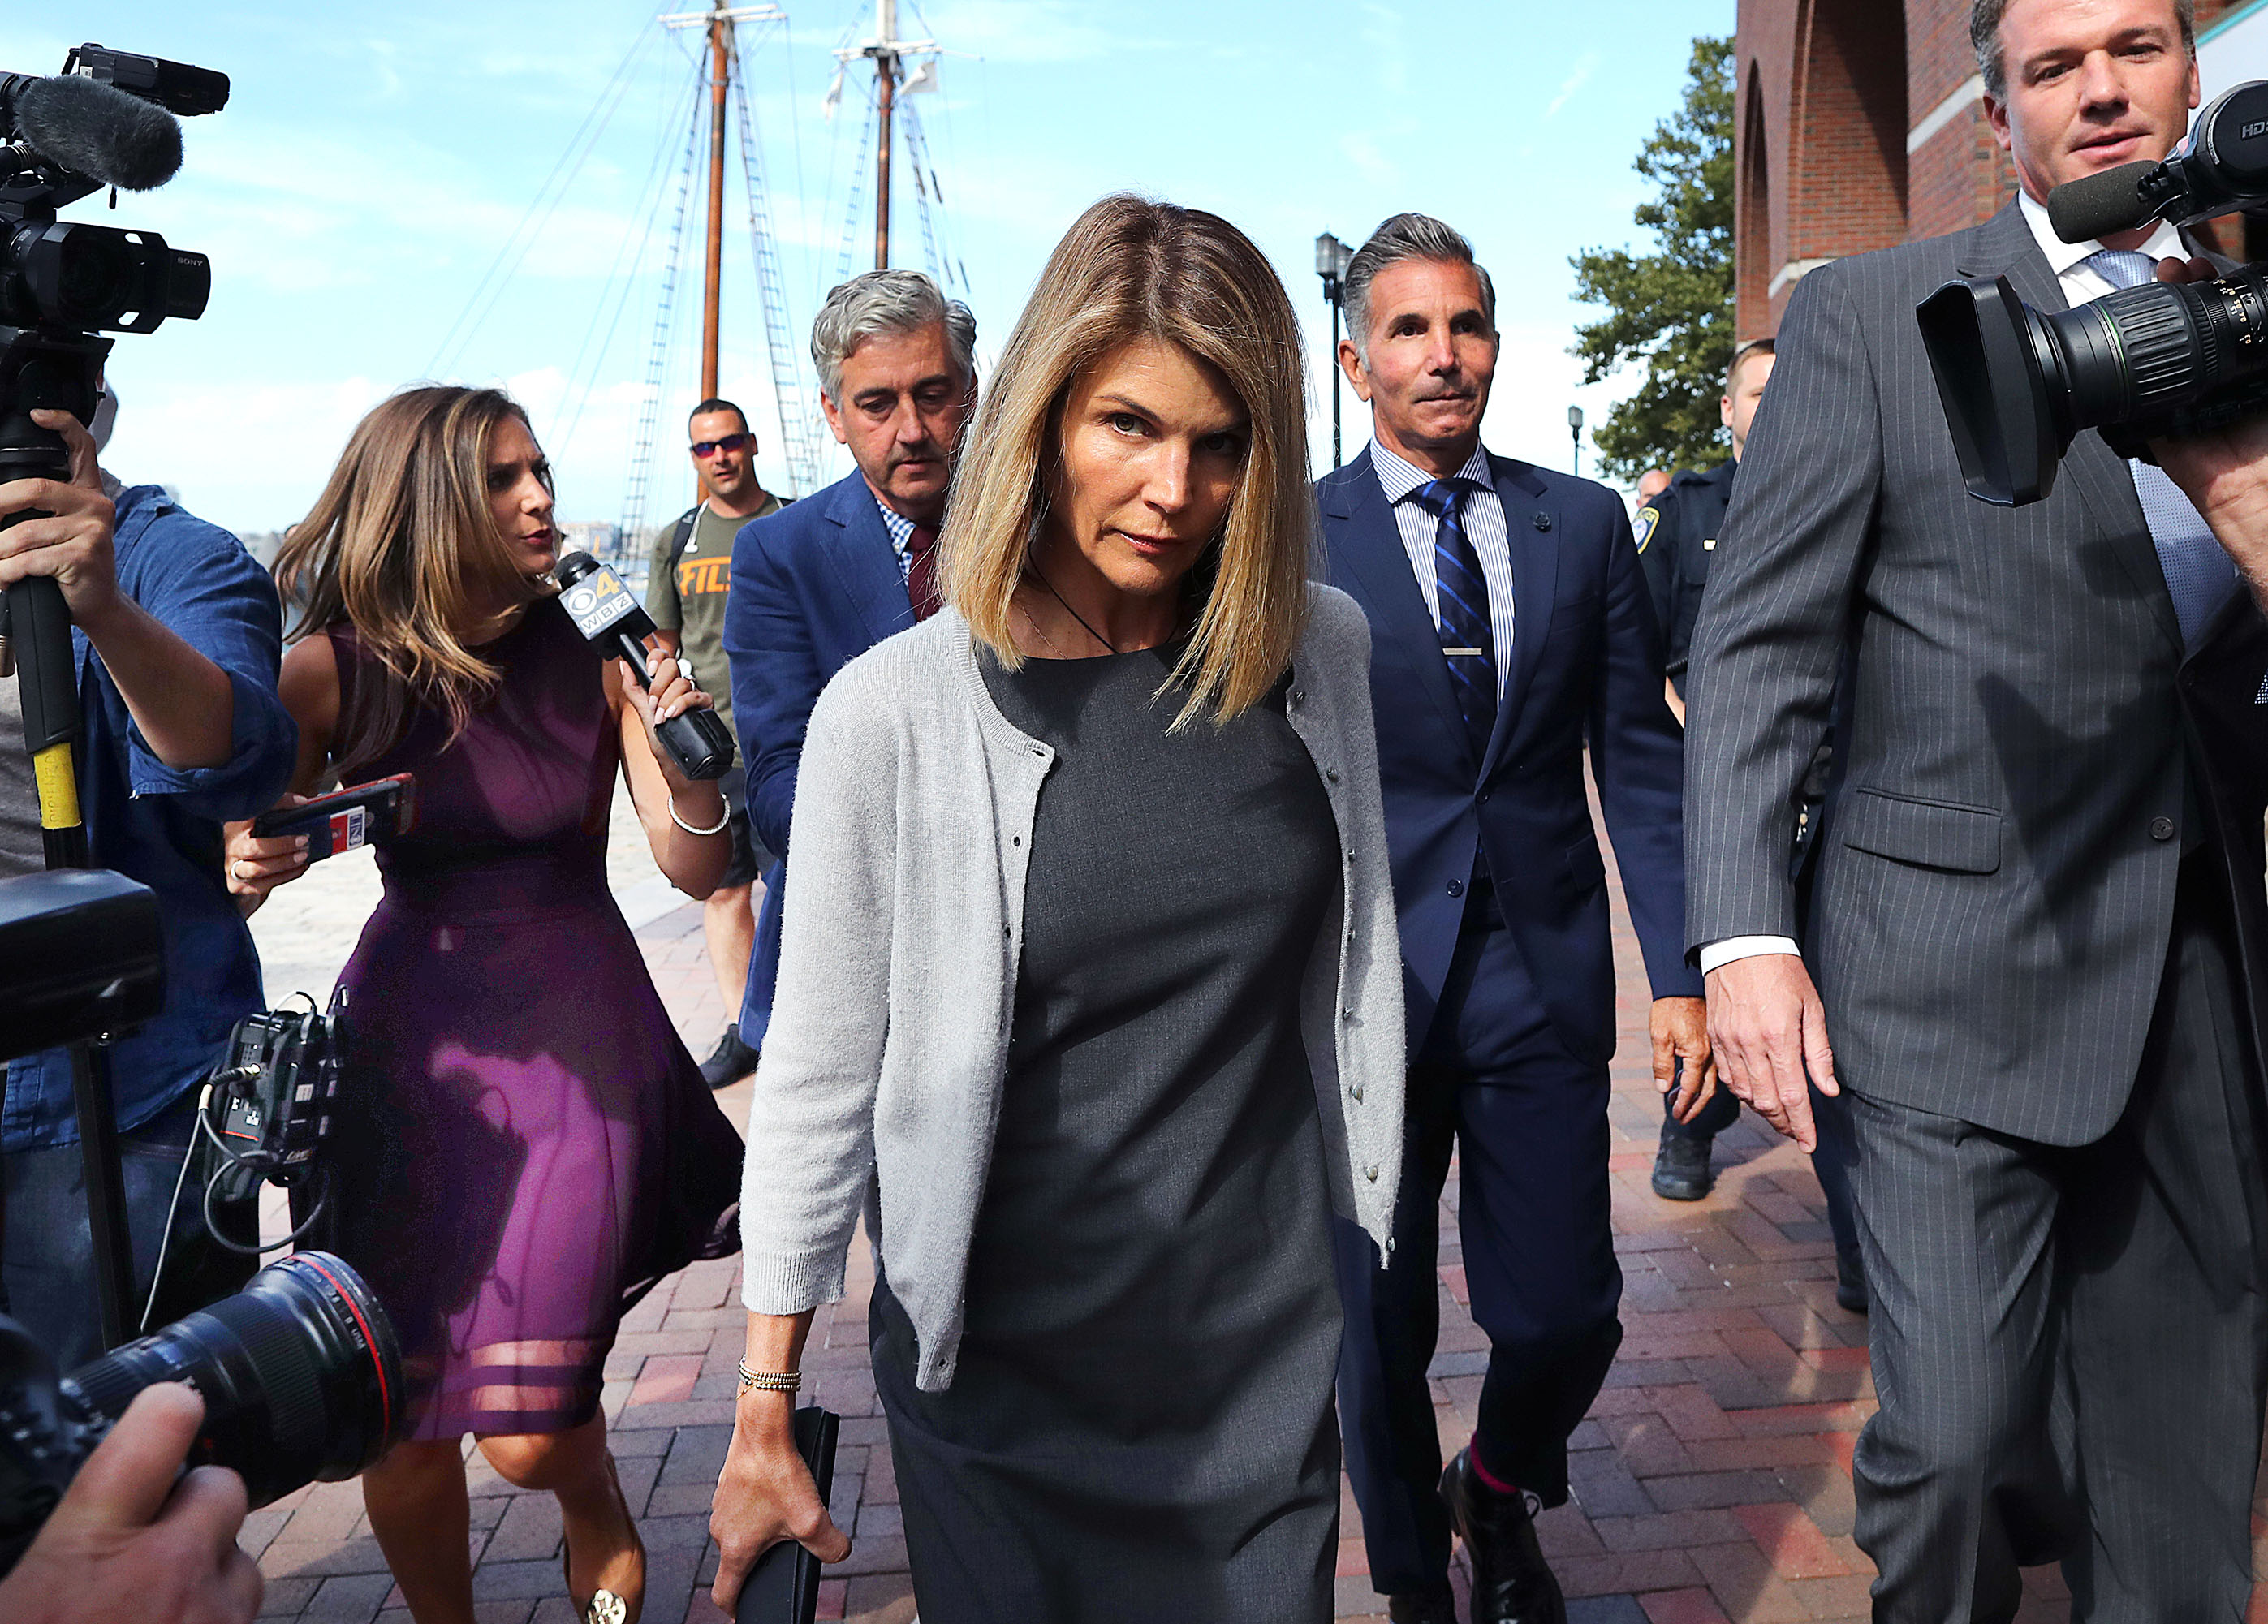 Scandals 2020: Lori Loughlin and Mossimo Giannulli